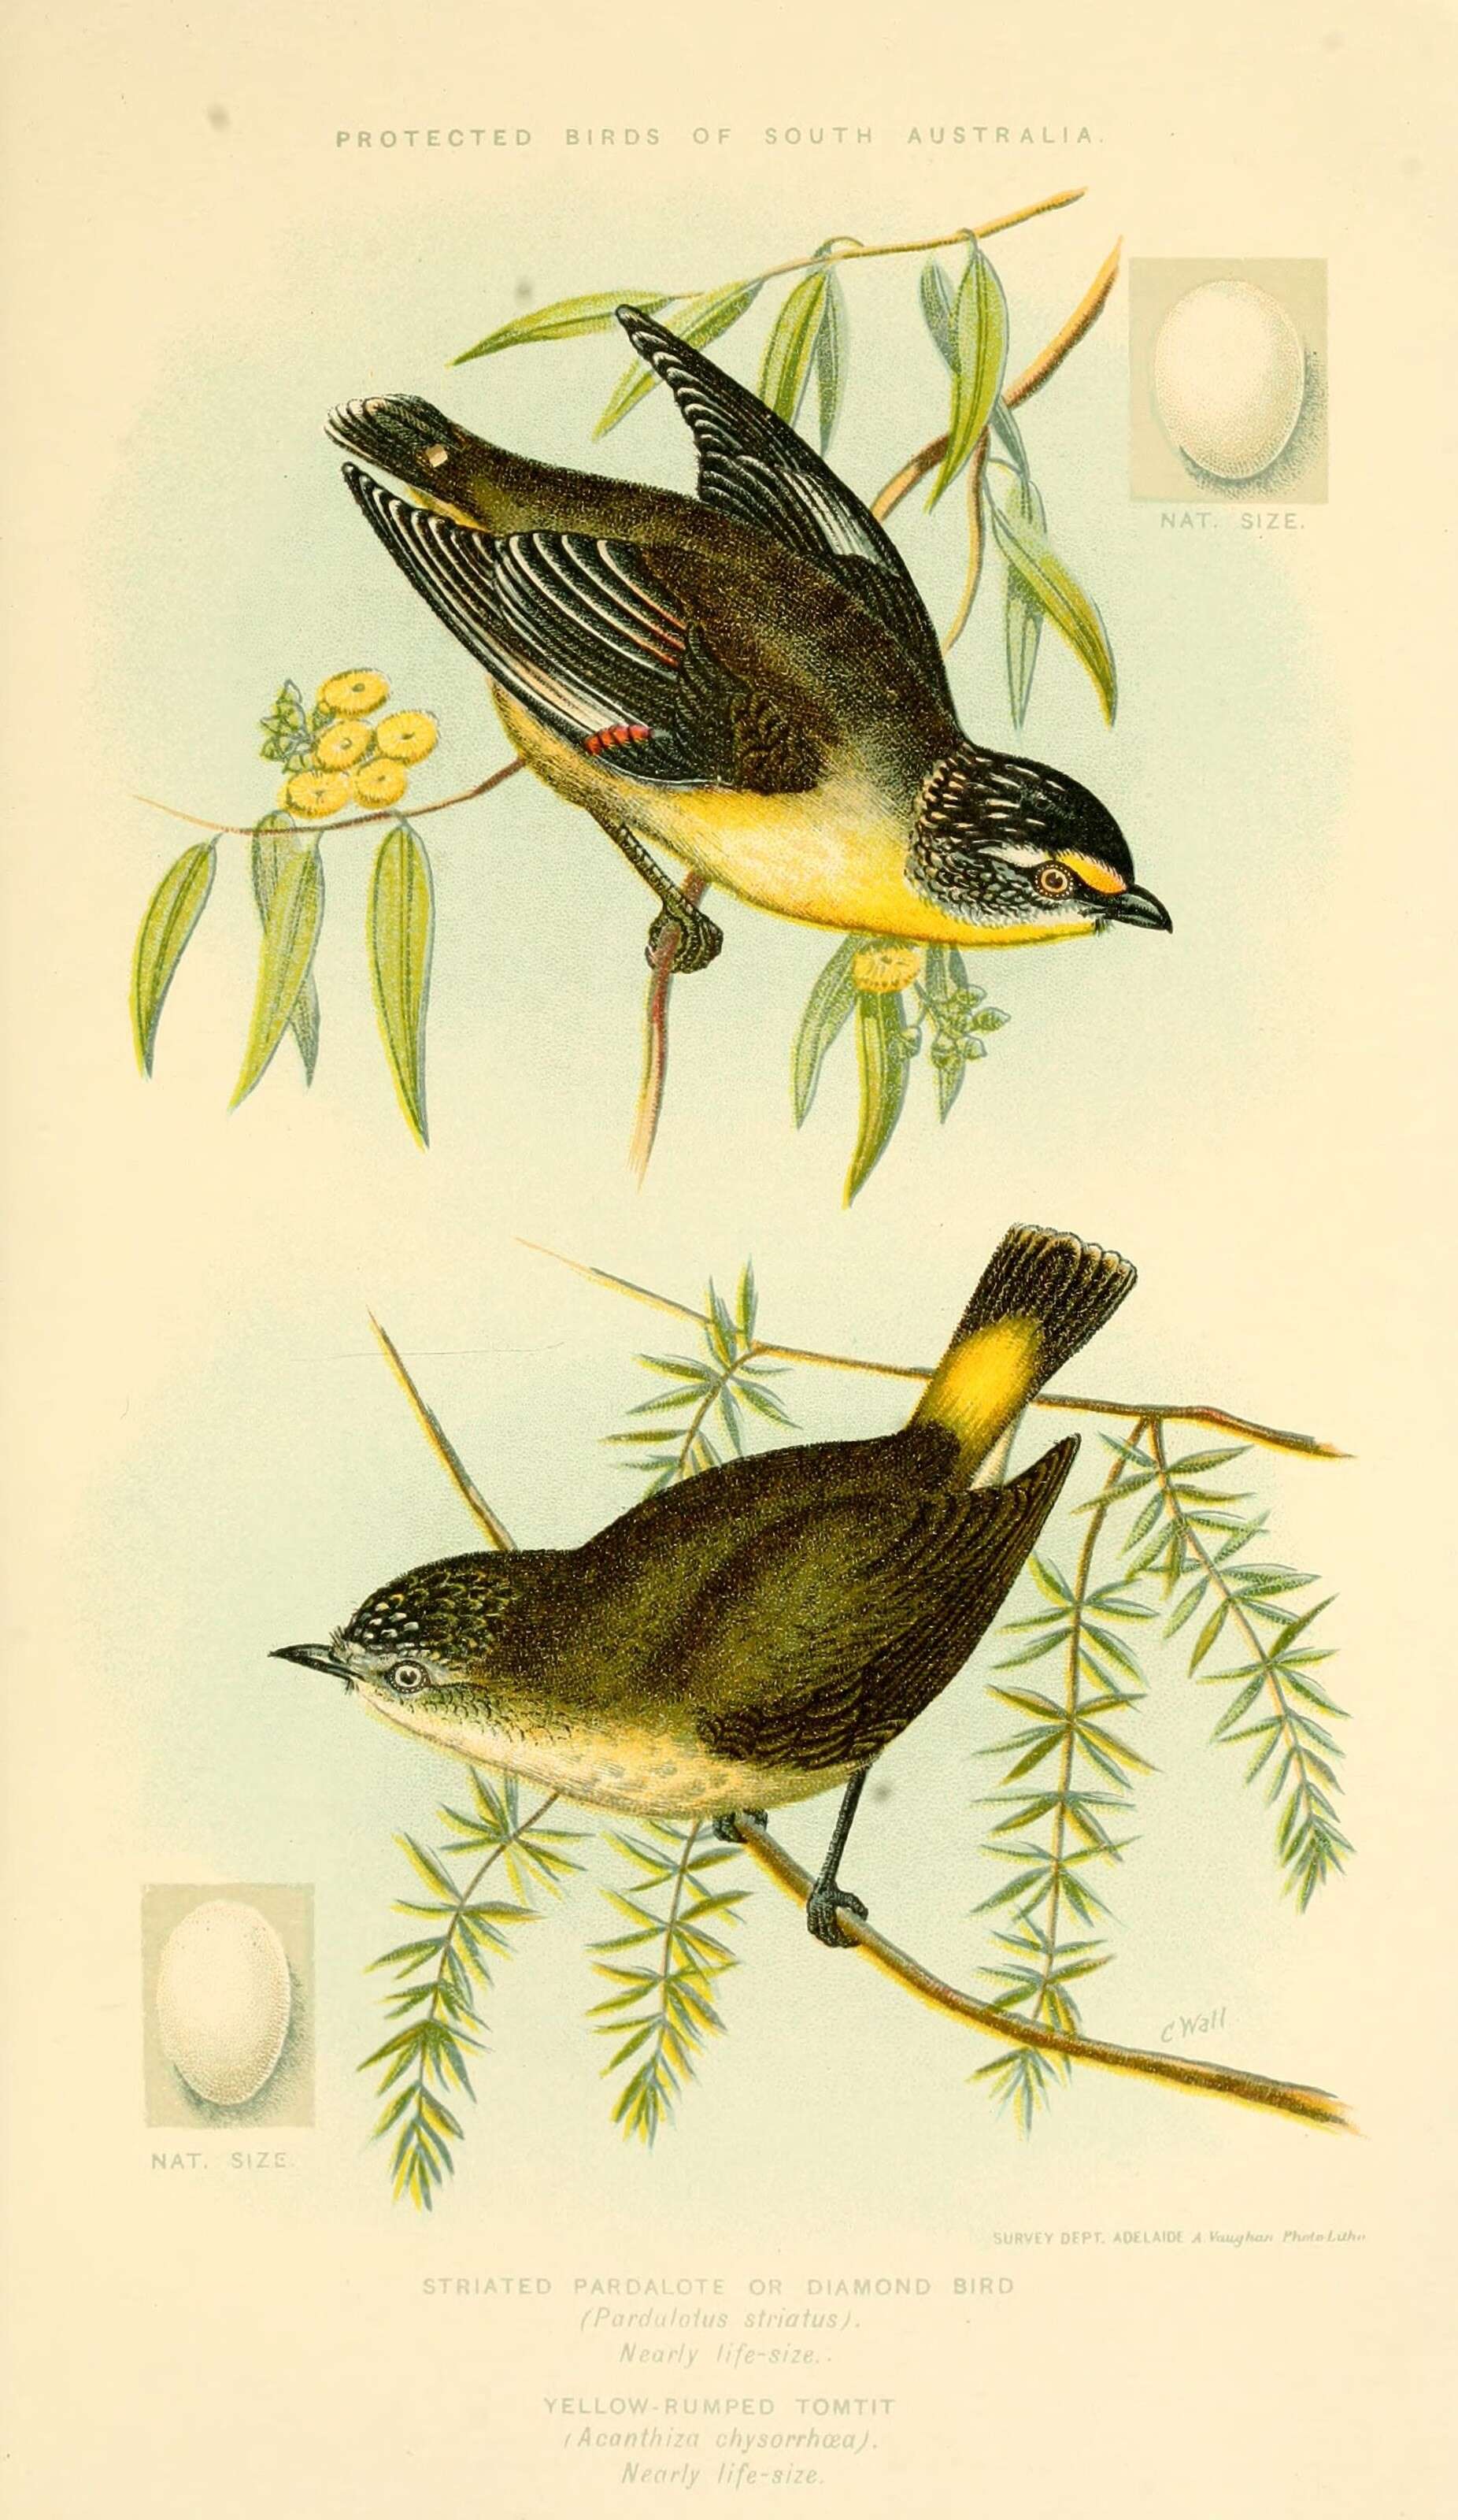 Image of Striated Pardalote